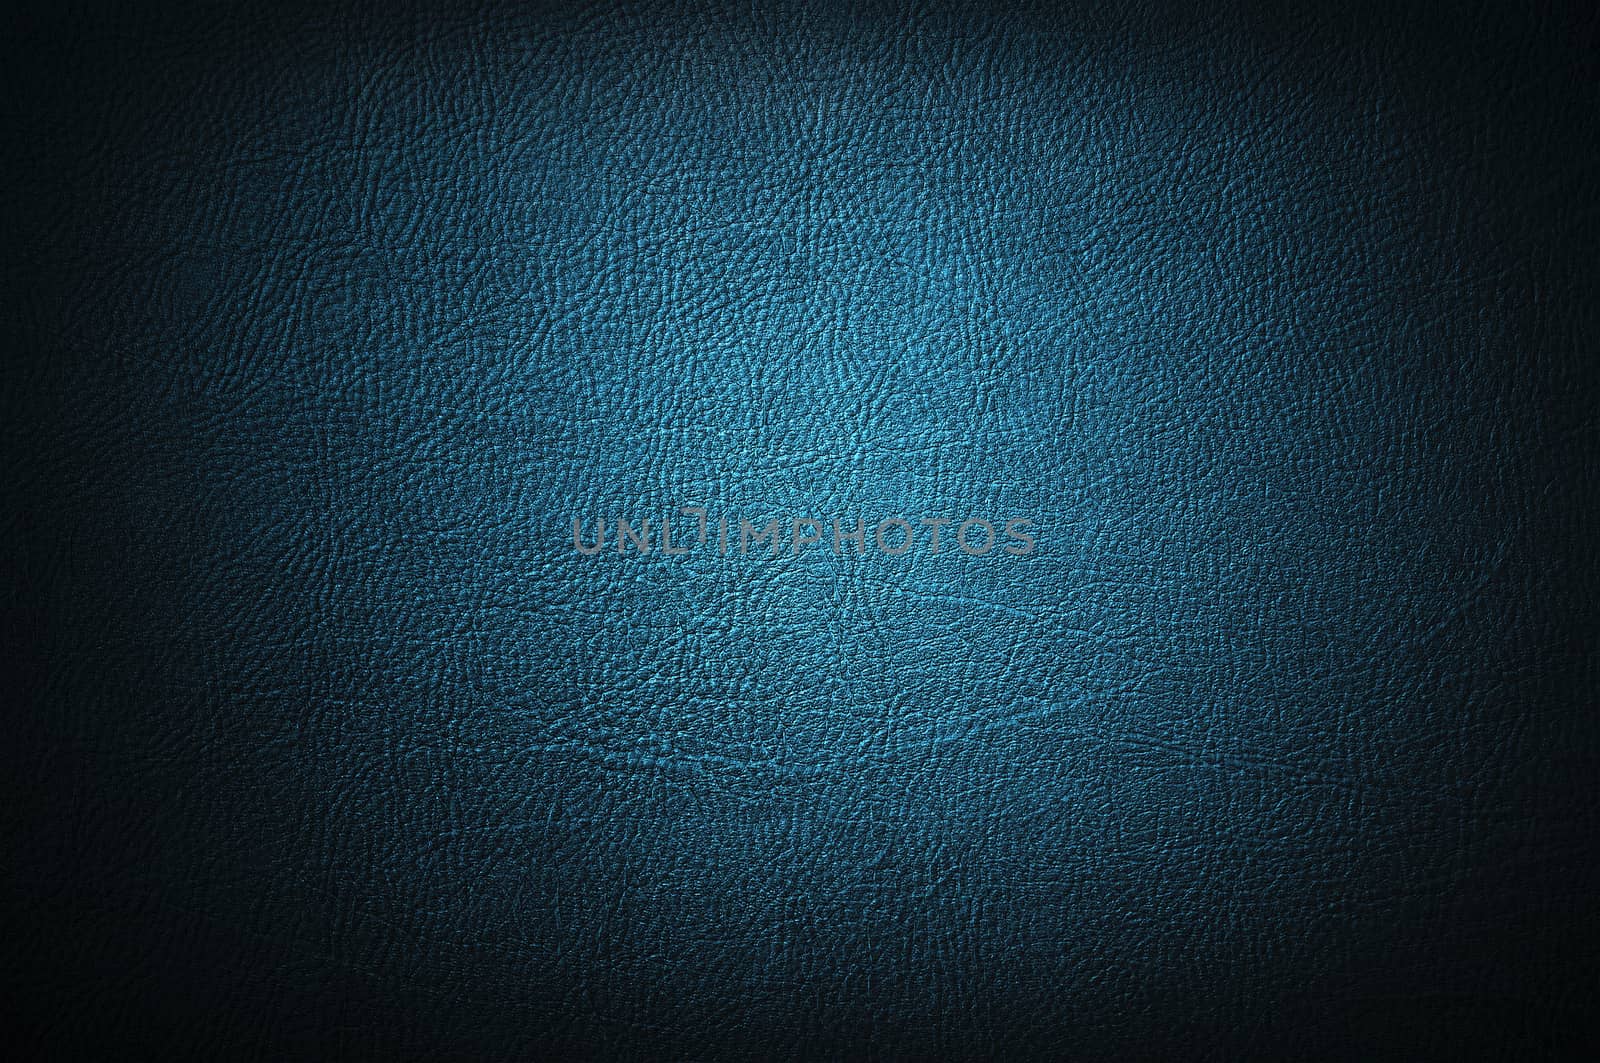 Dirty blue leather texture